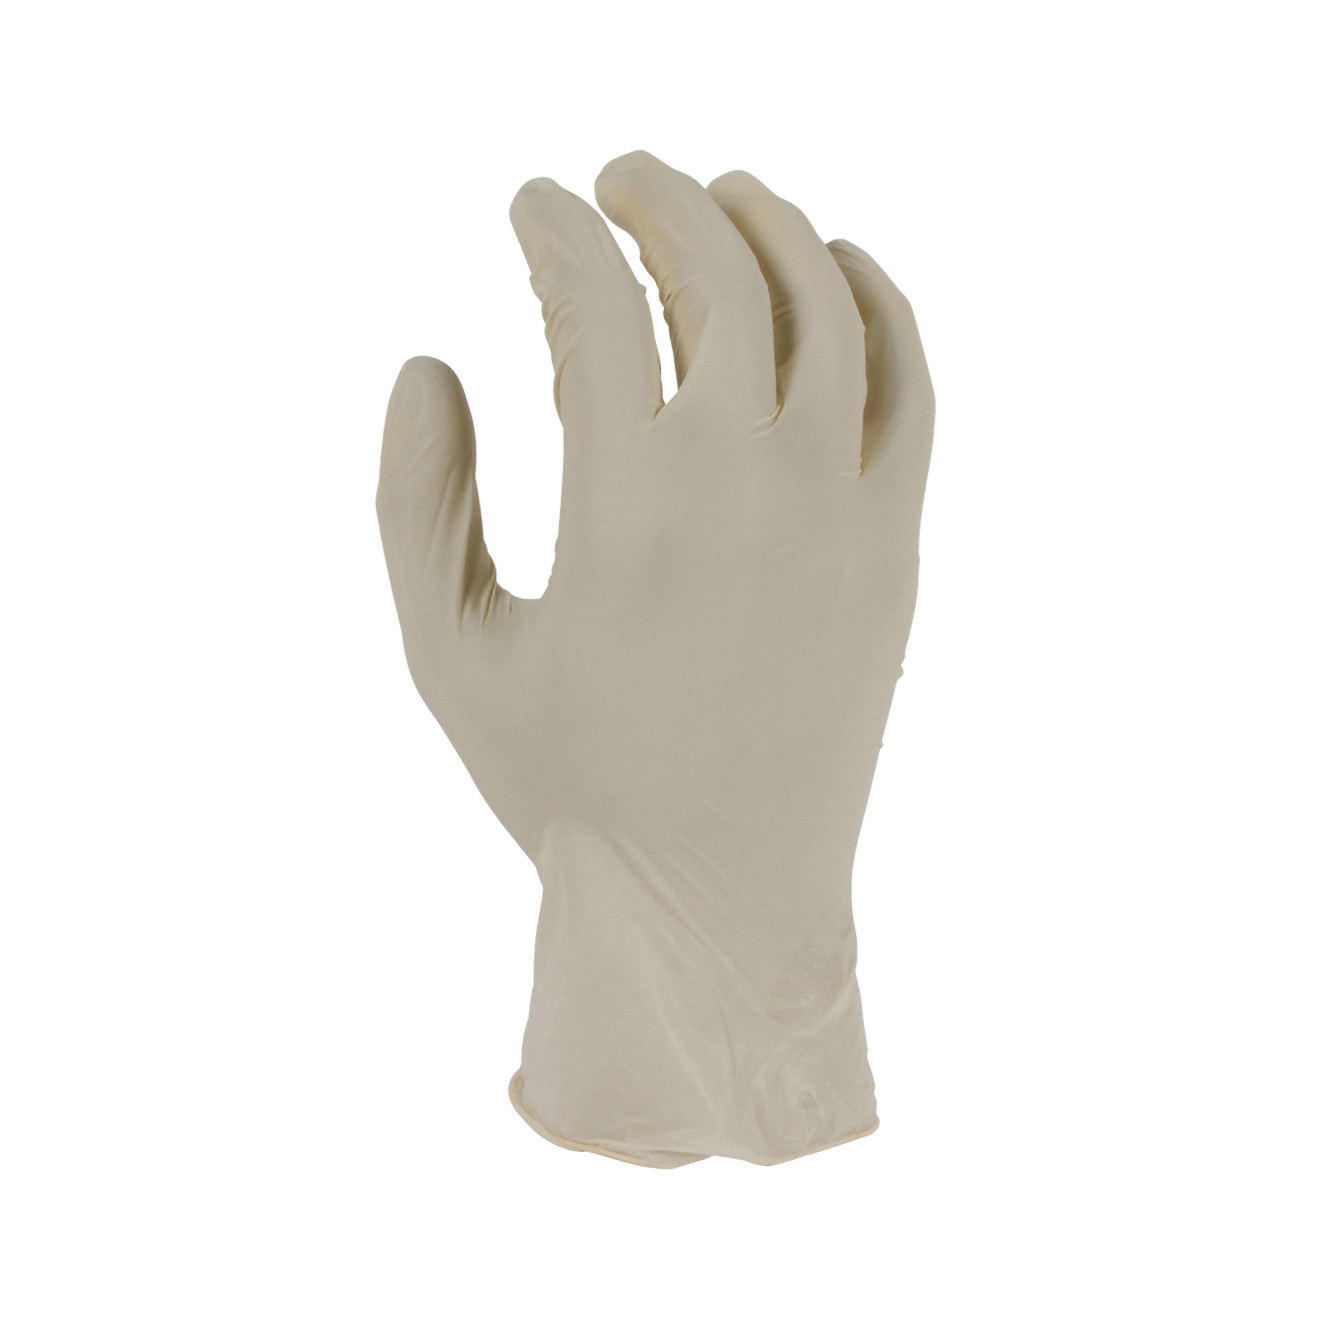 Latex Free Powdered Disposable Gloves